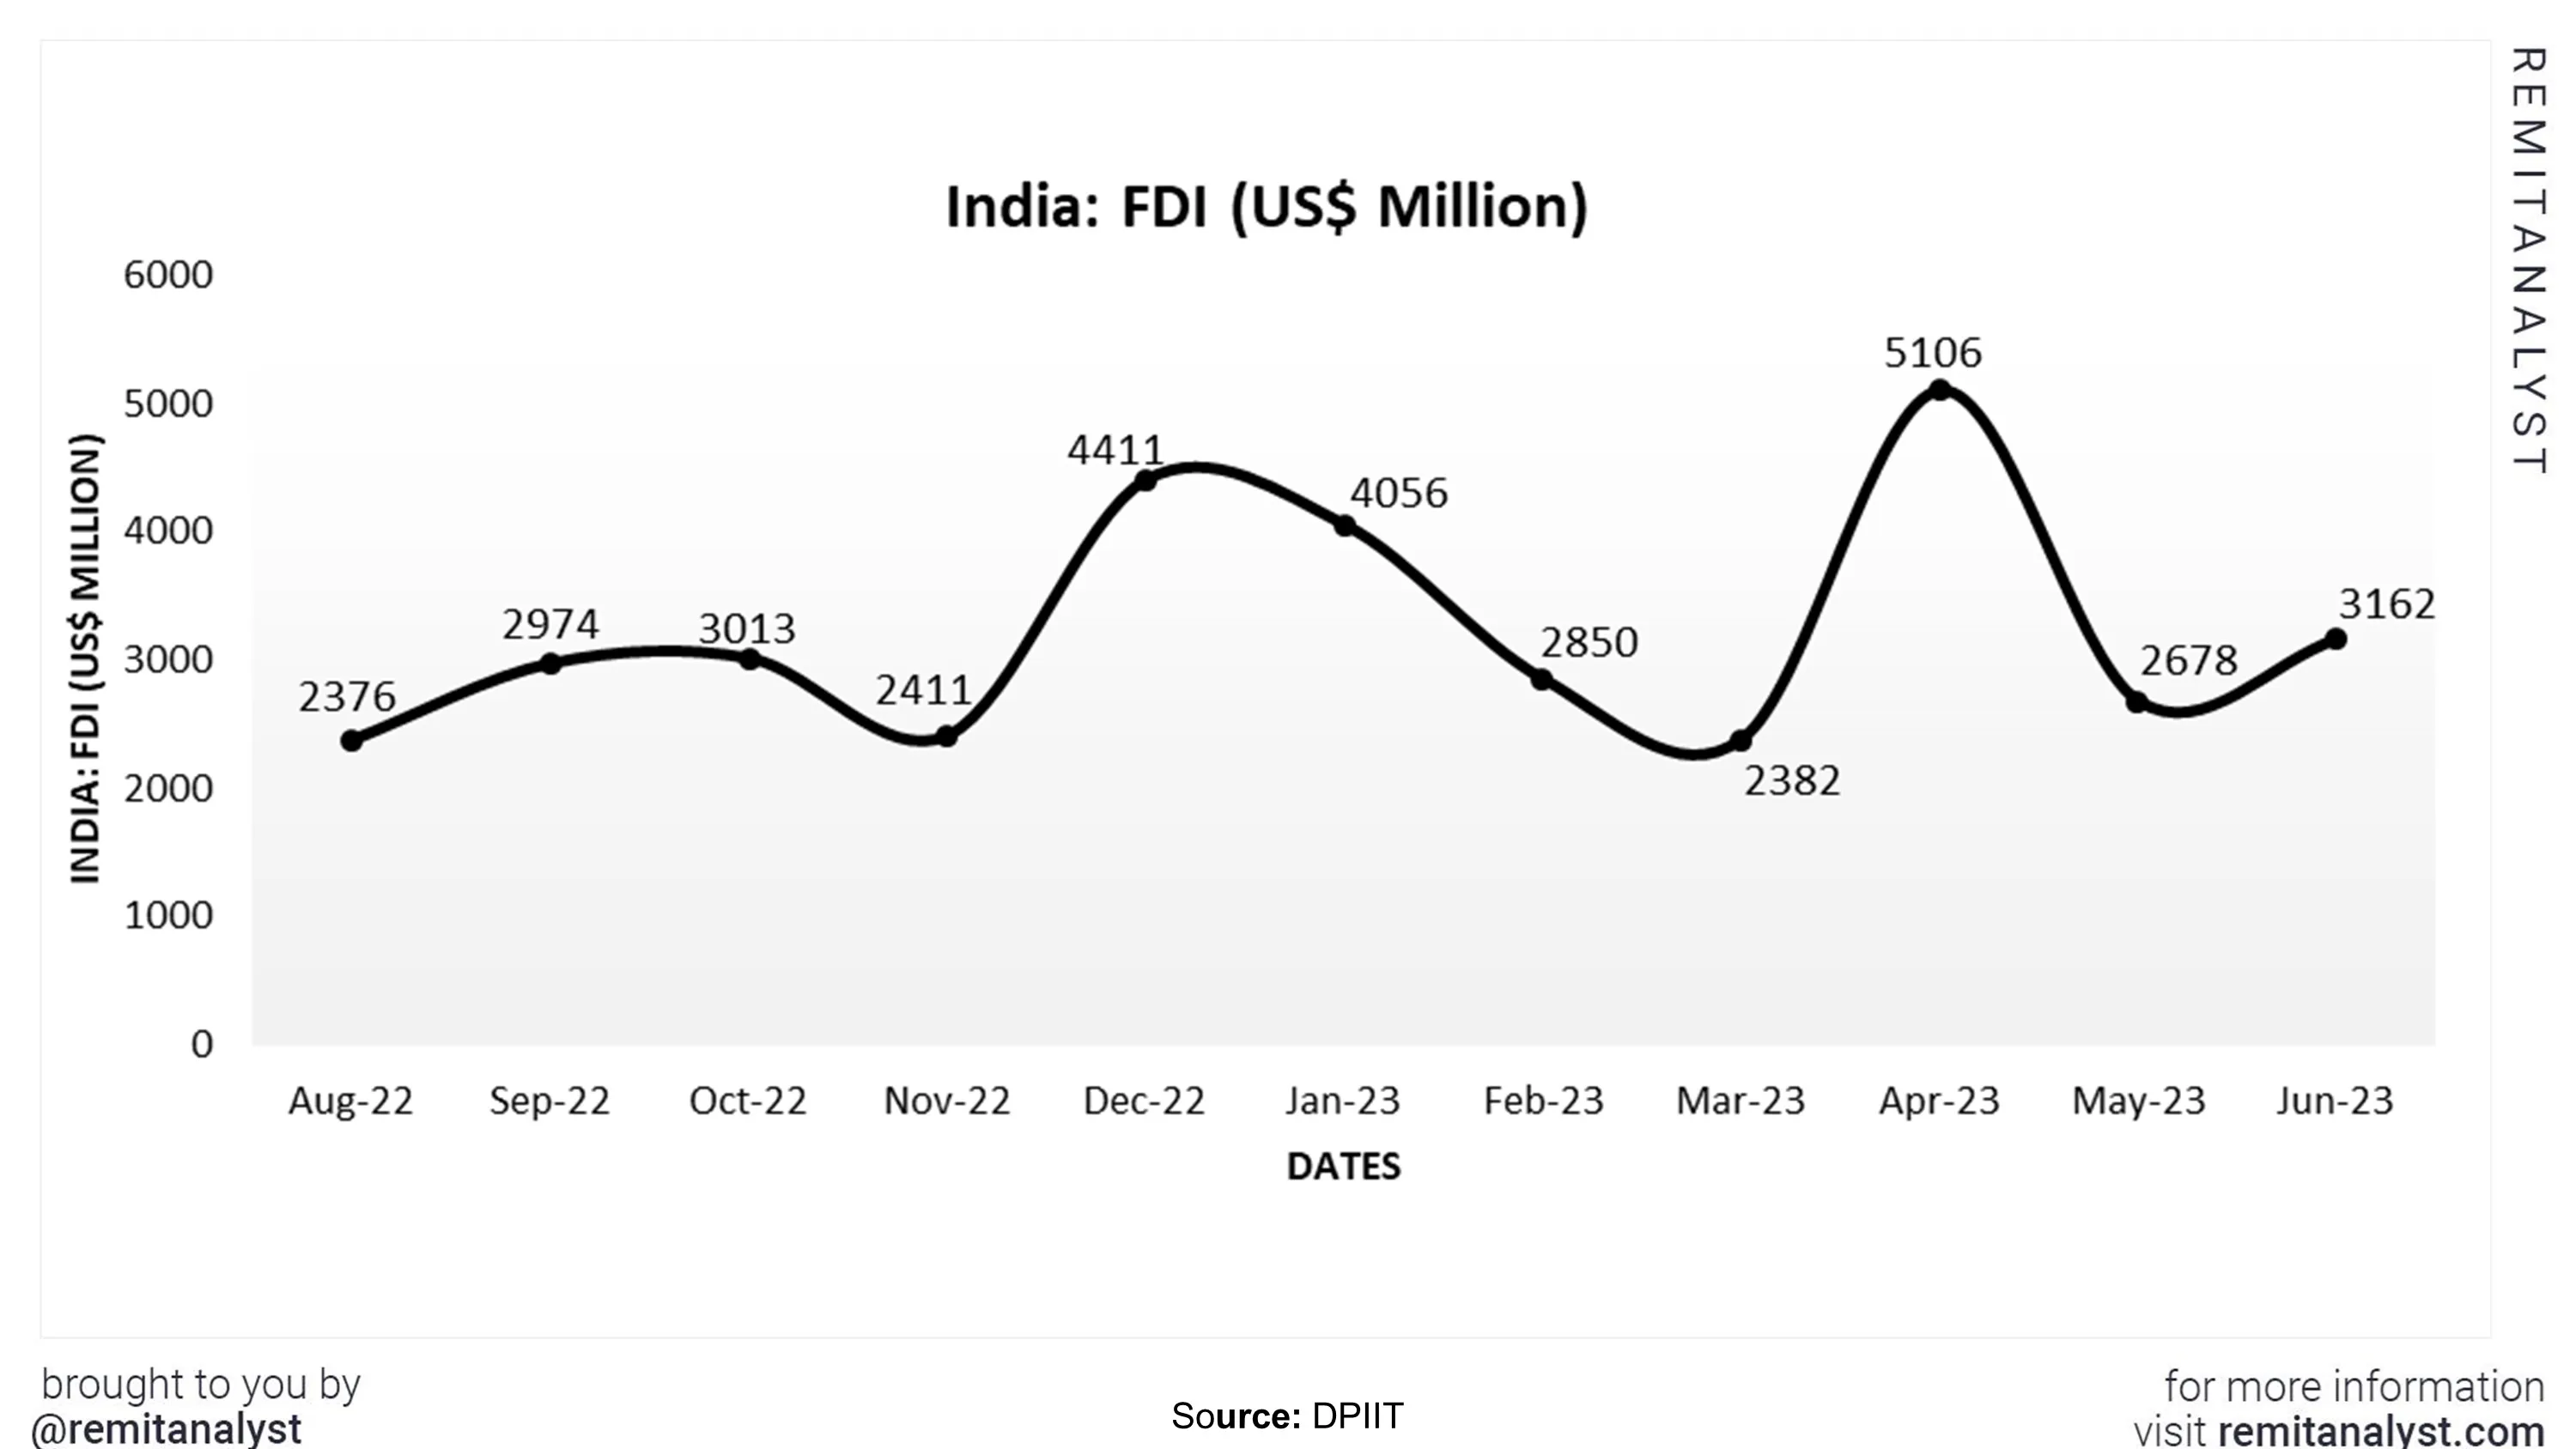 fdi-in-india-from-aug-2022-to-jun-2023